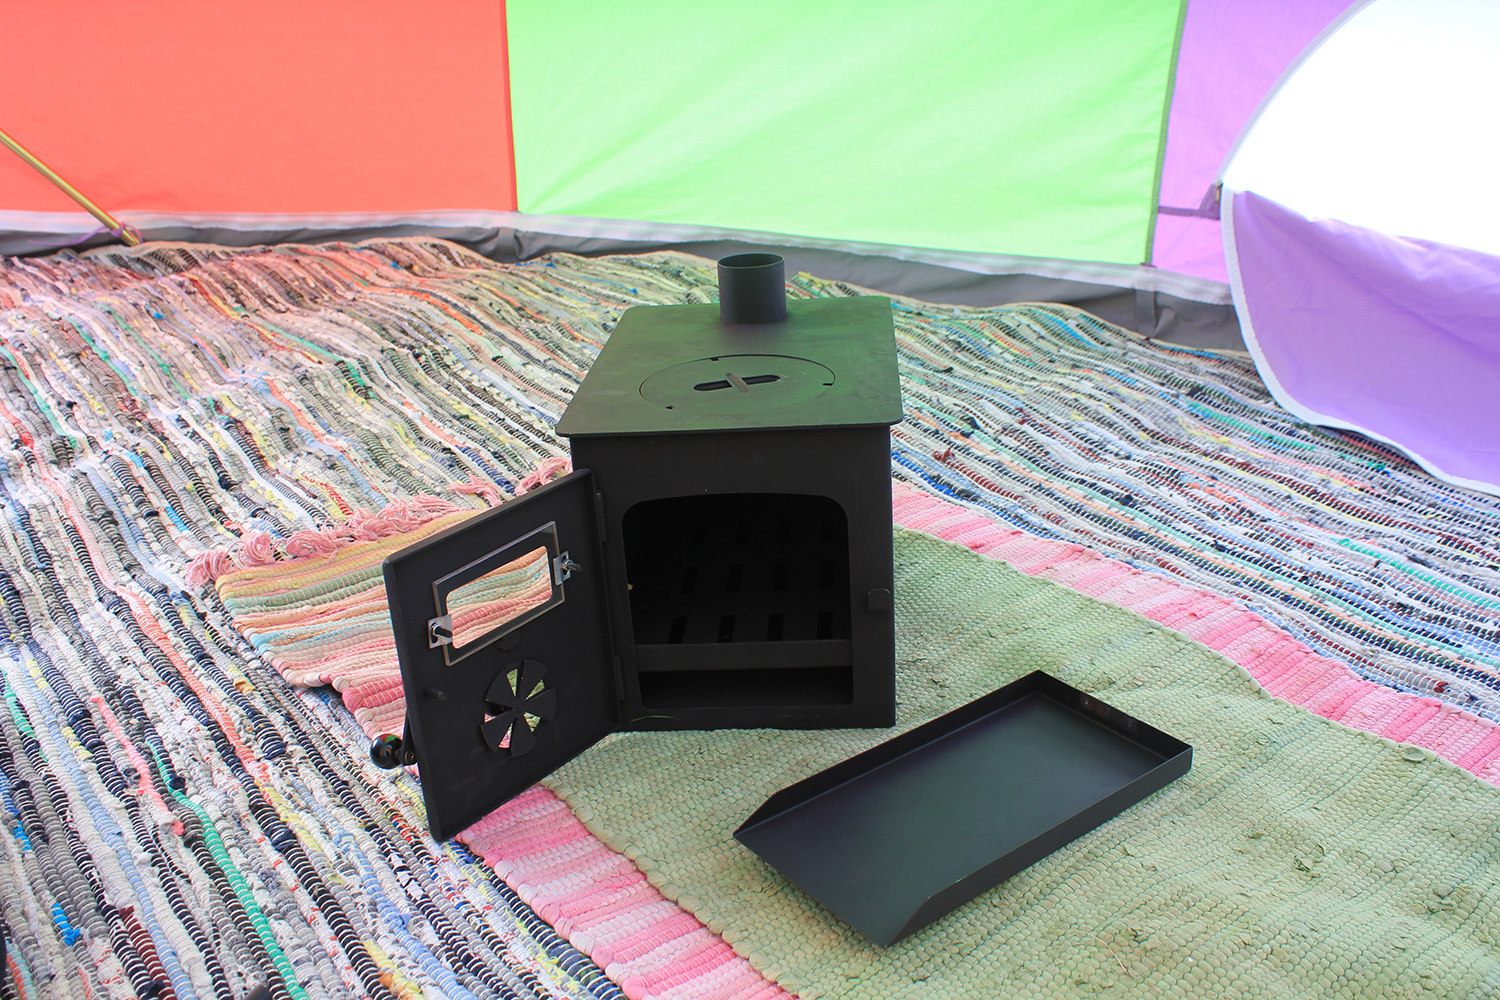 Putting the Outbacker® 'Firebox' Tent Stove together